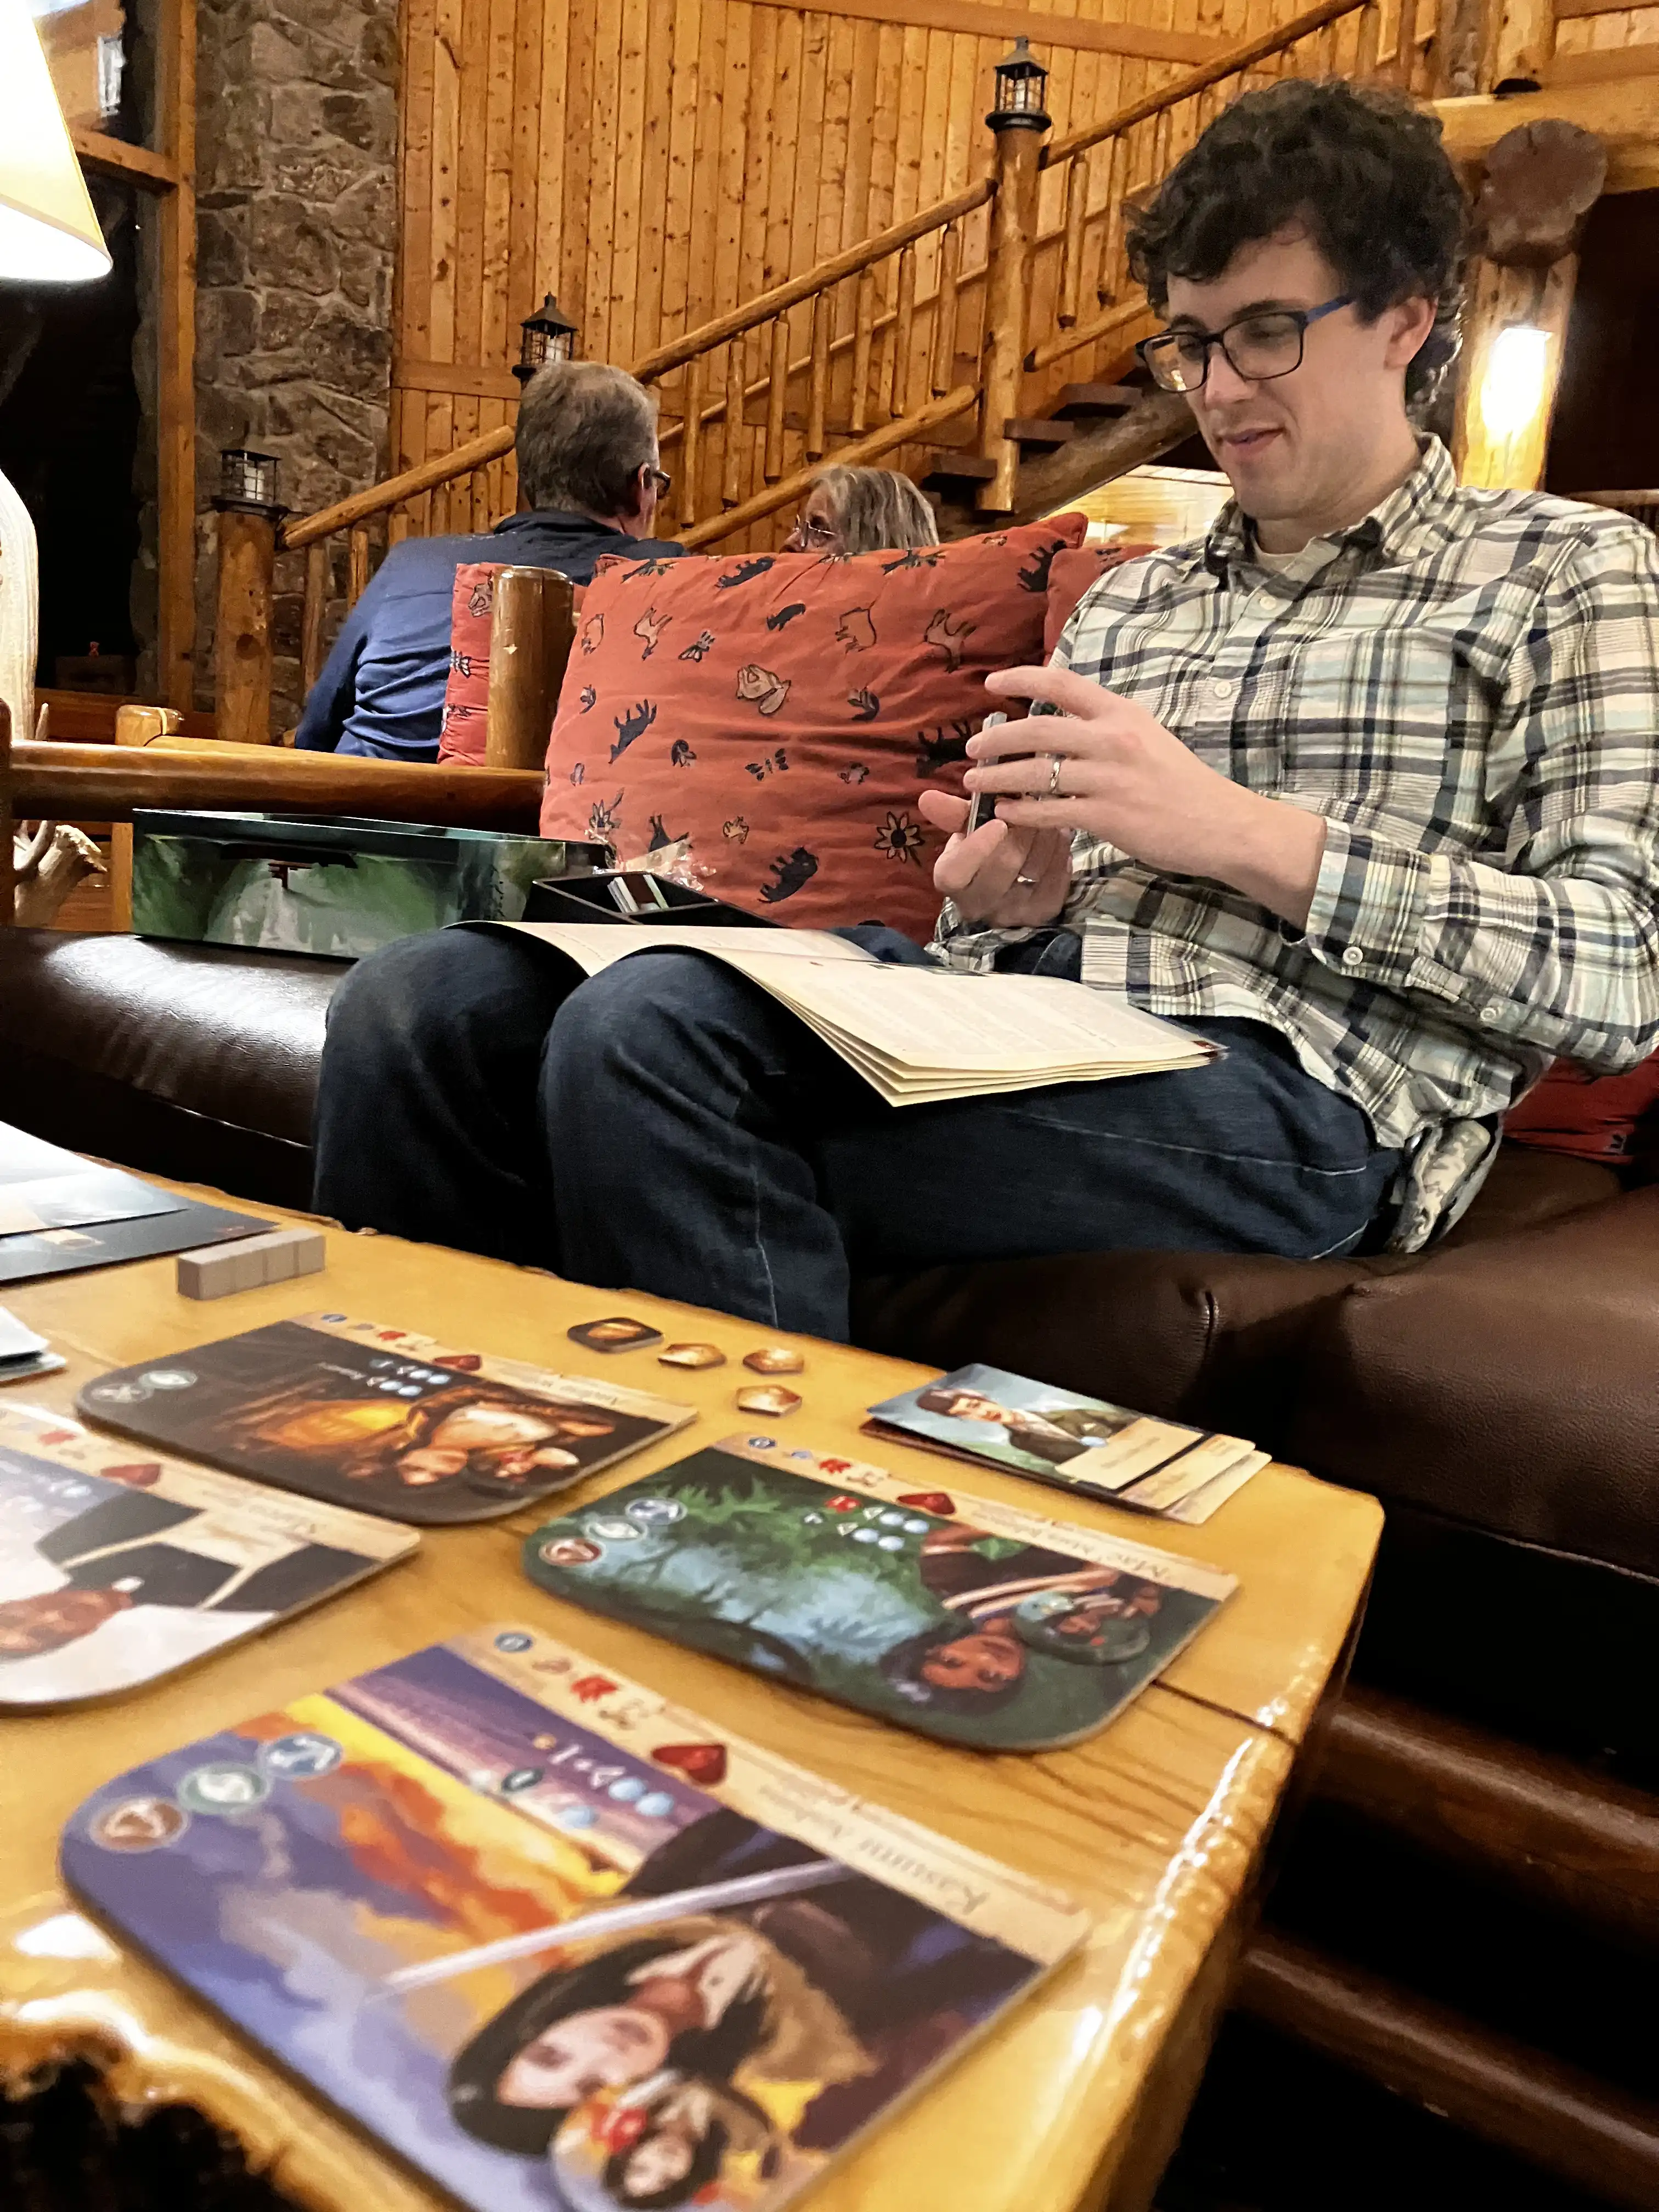 Alex playing his new board game in the wooden public lodge area.